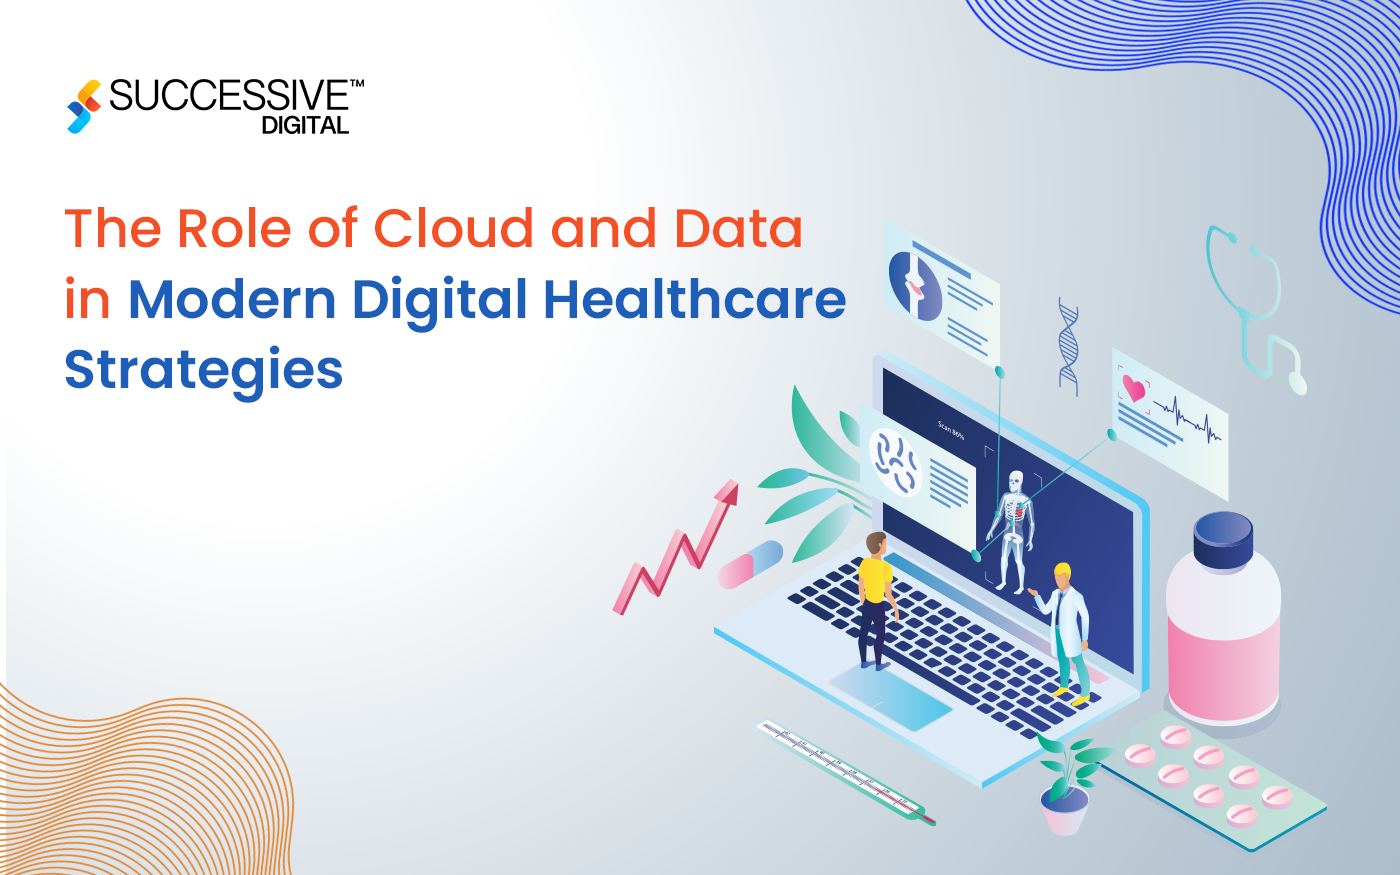 The Role of Cloud and Data in Modern Digital Healthcare Strategies